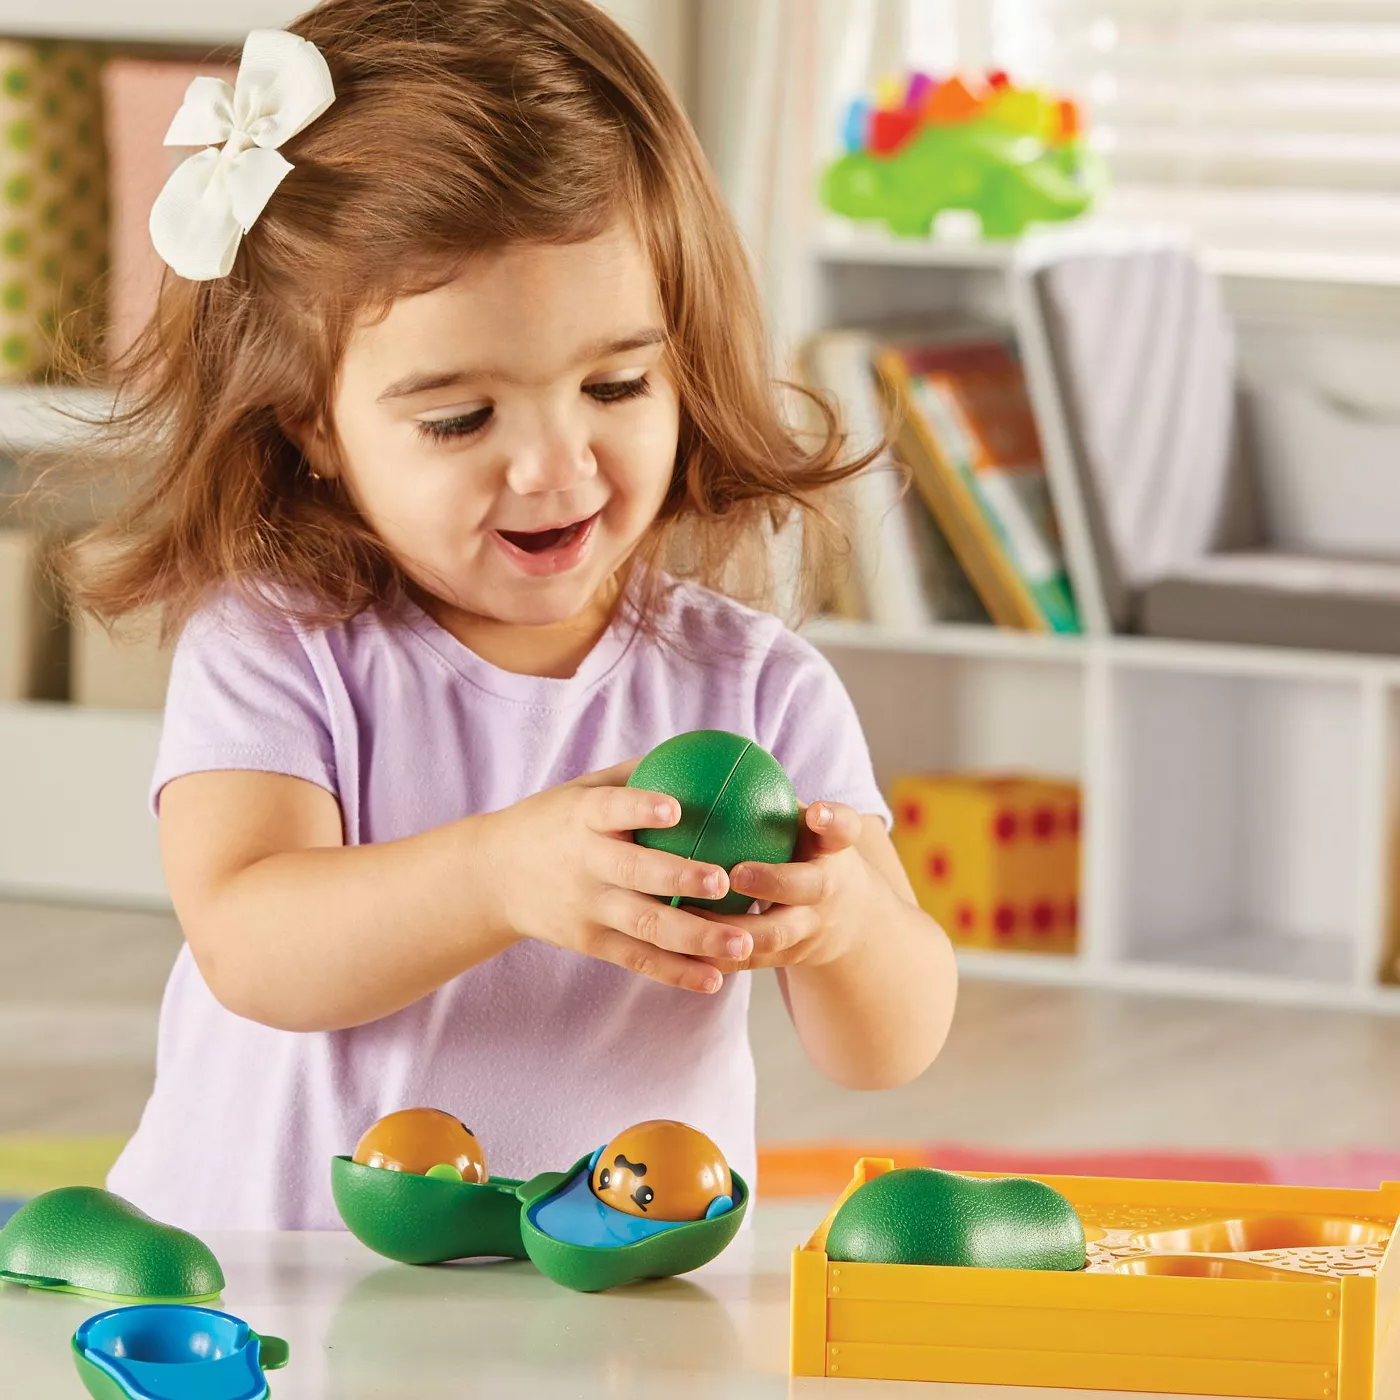 Child model playing with green plastic avocado